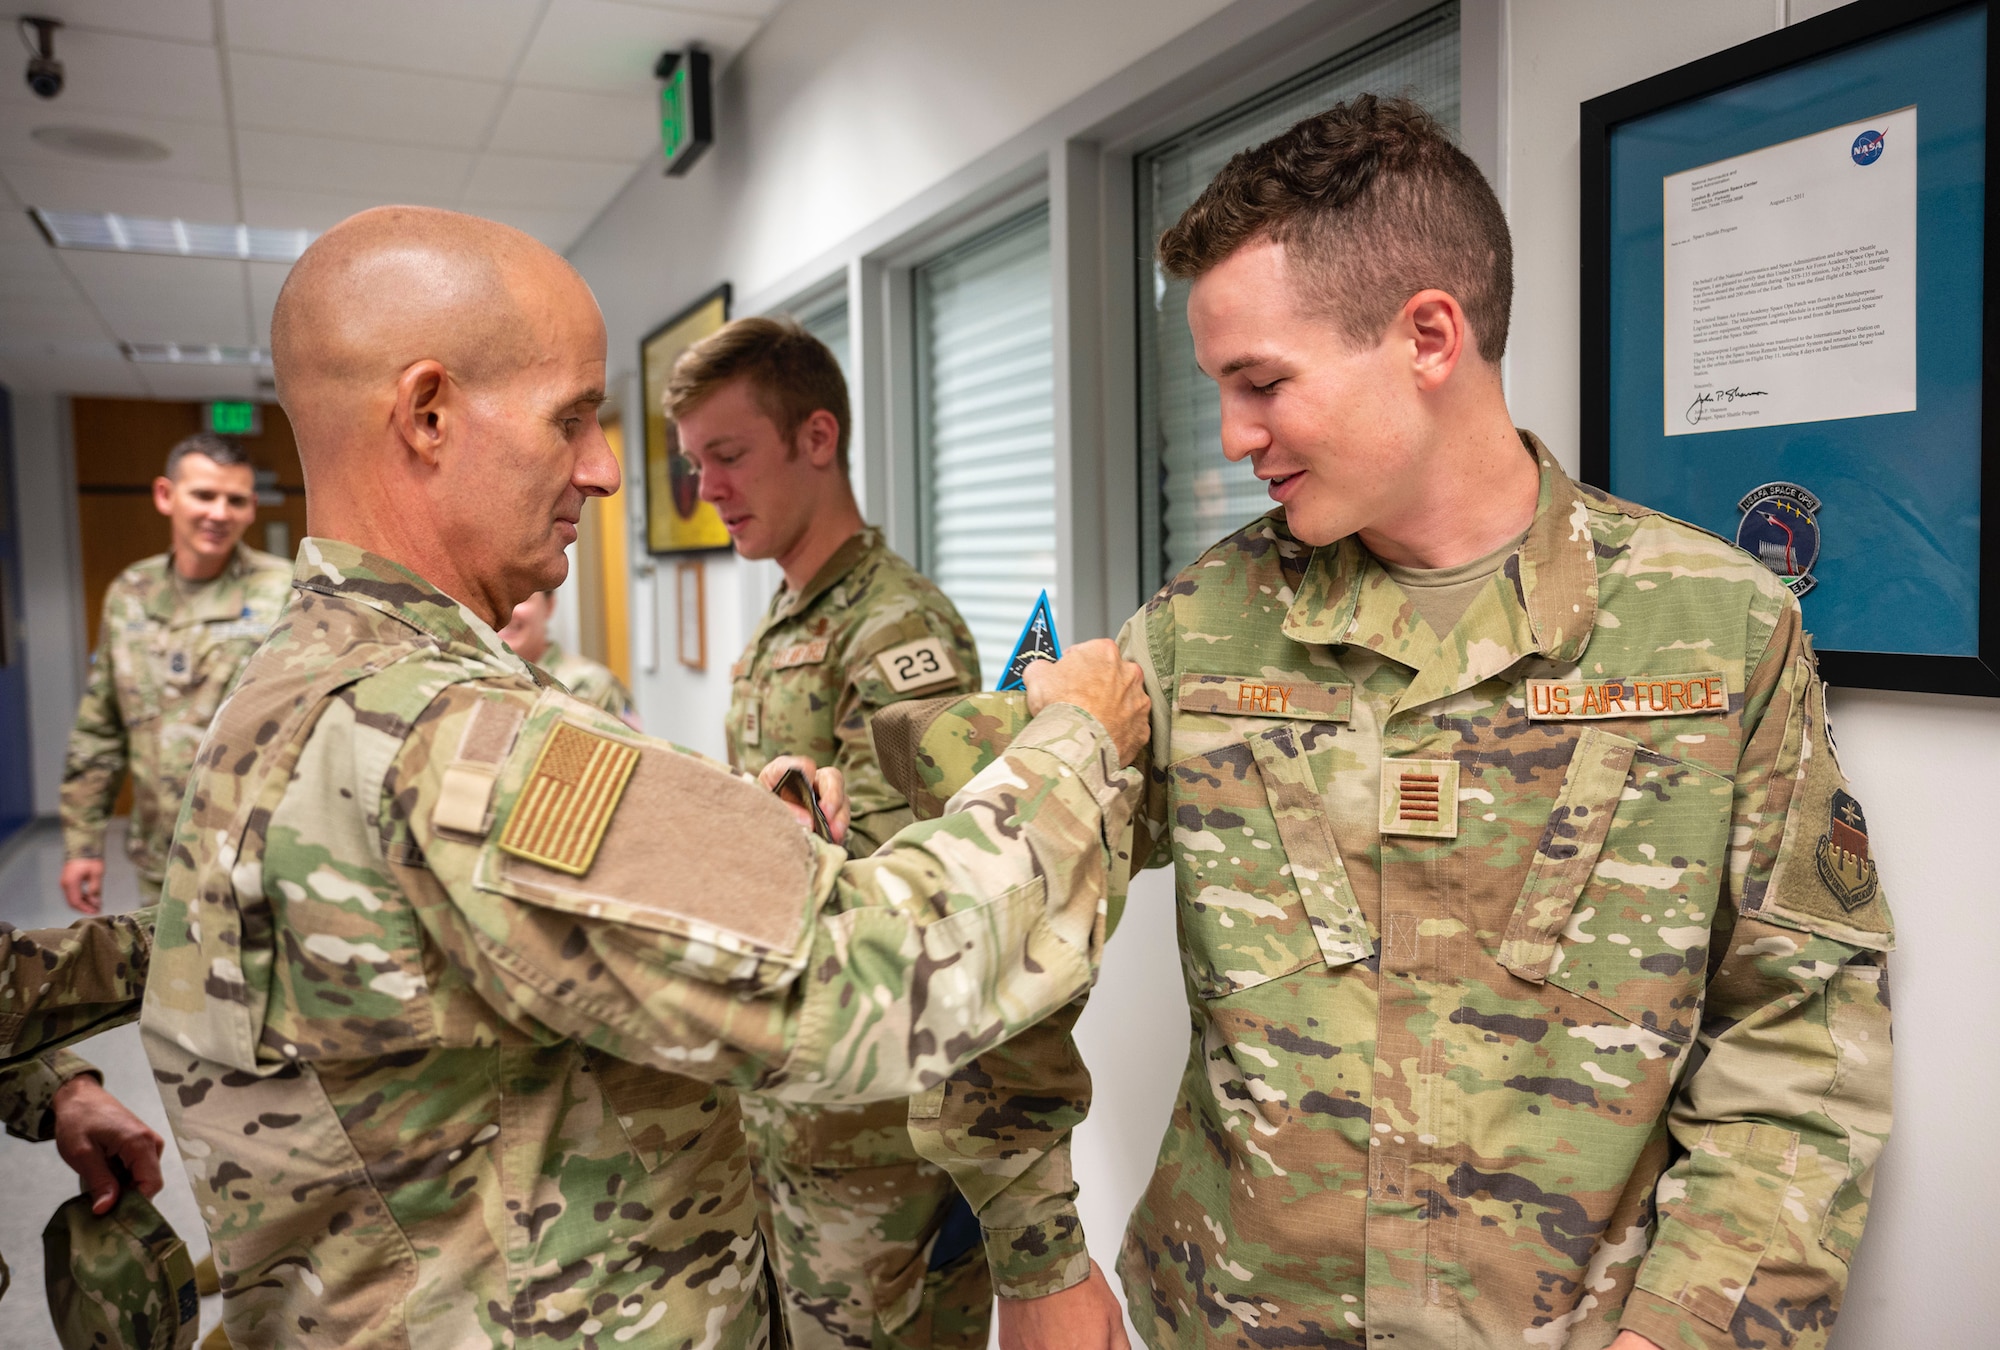 Col. Michael Assid, Space Training and Readiness Command senior IMA, gives his STARCOM patch to an U.S. Air Force Academy cadet following a tour of the FalconSAT program